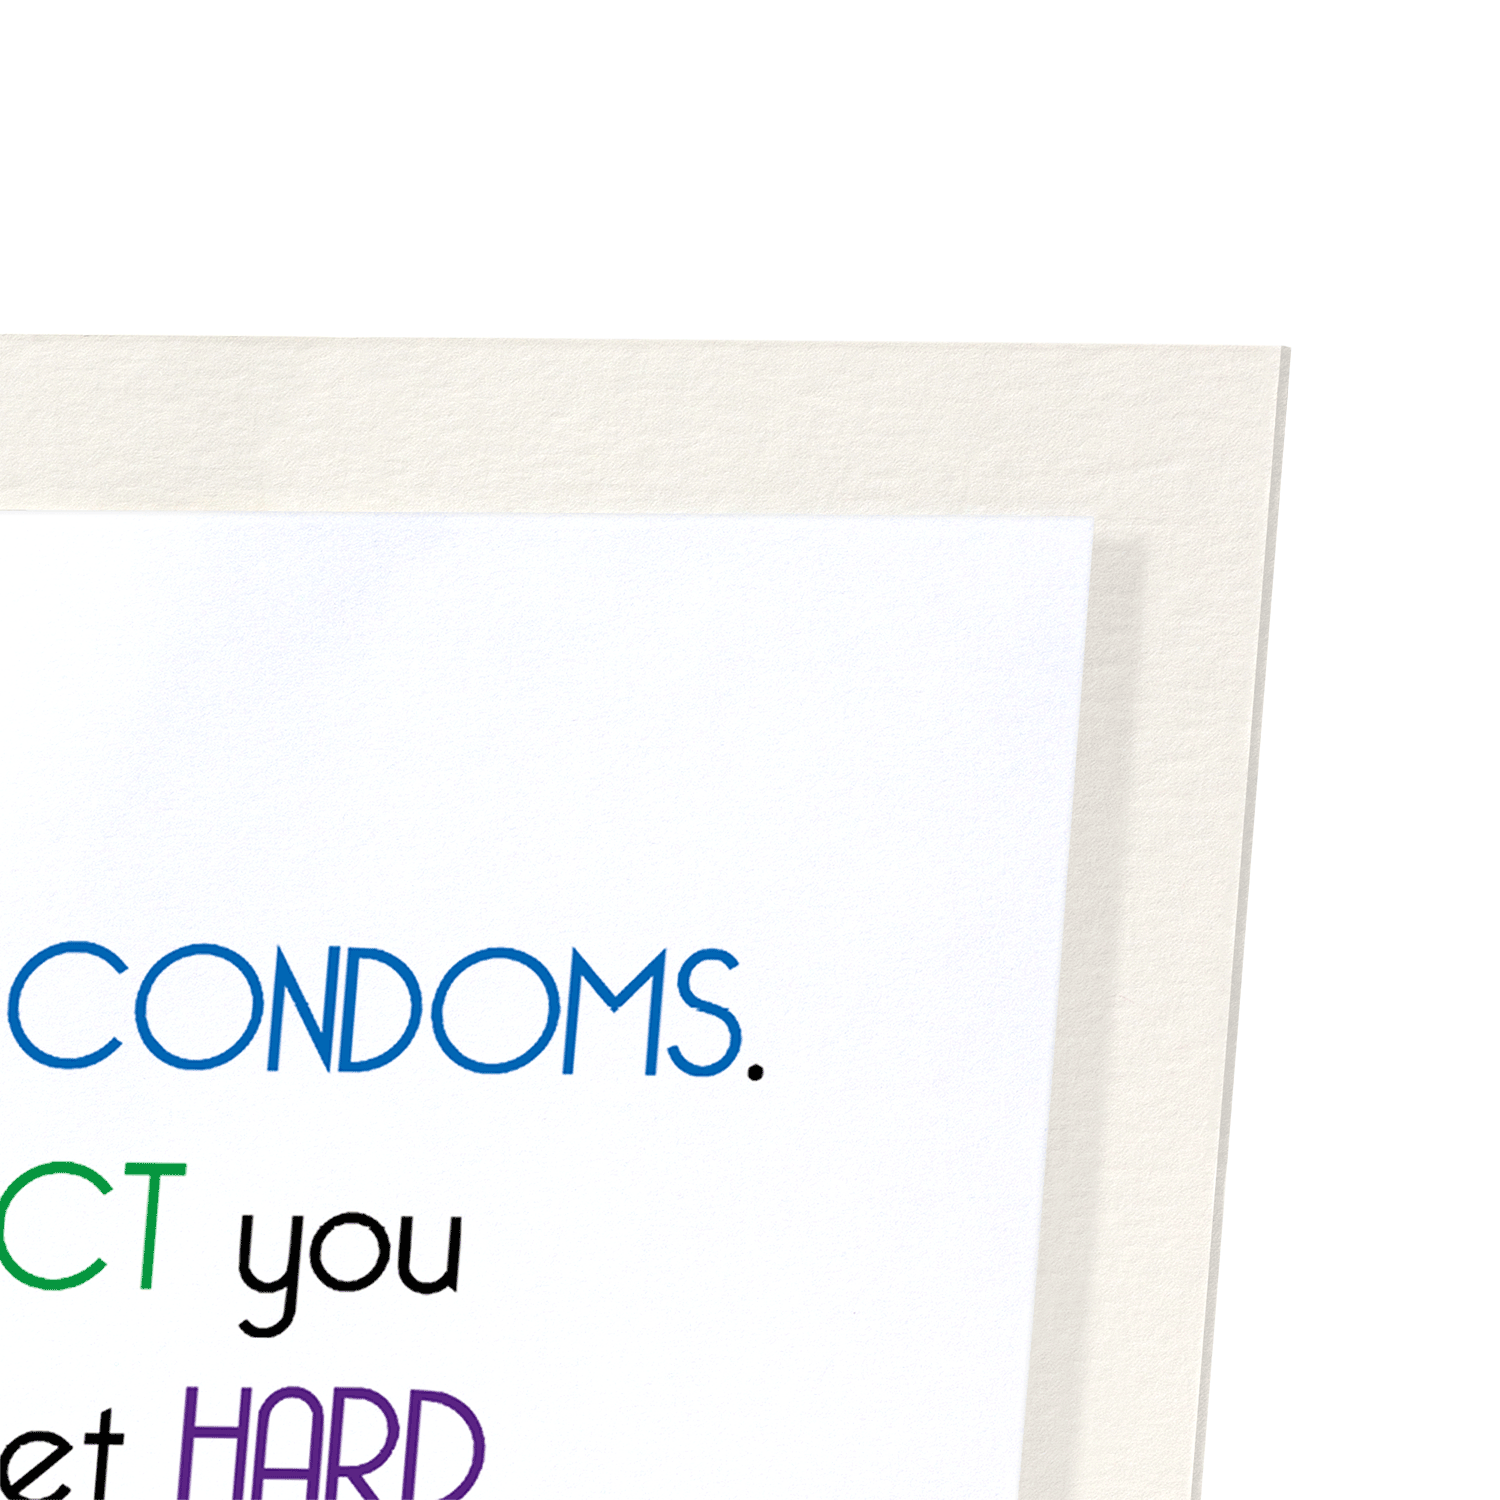 FRIENDS AND CONDOMS